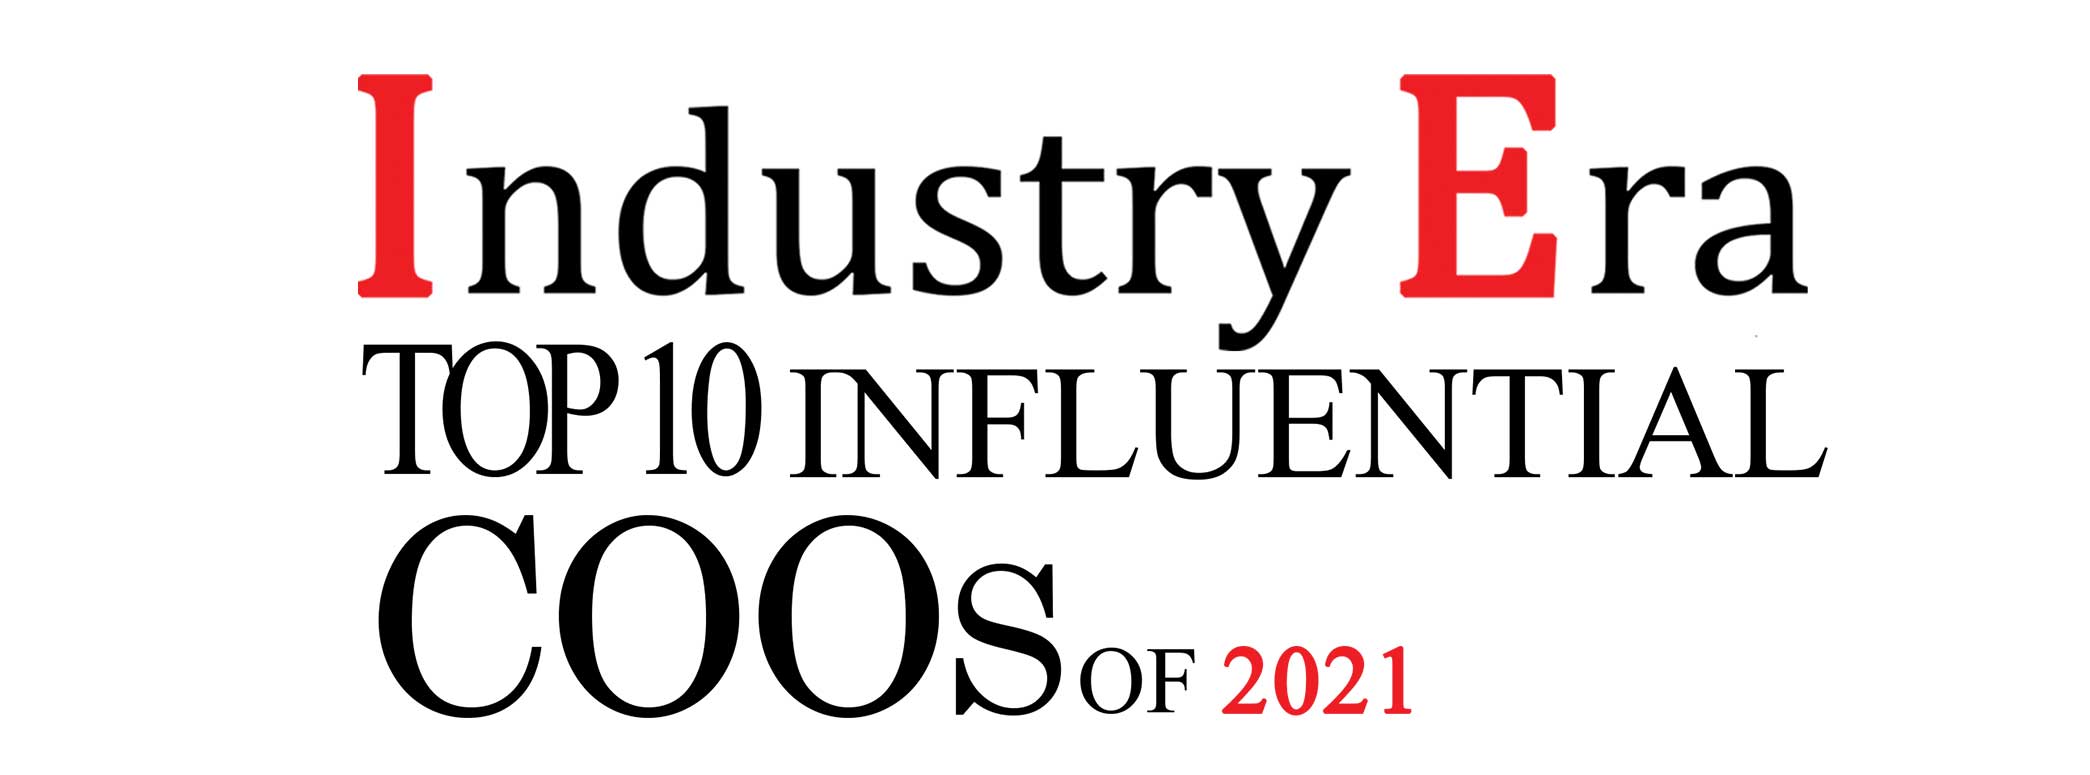 Top 10 Influential COOs of 2021 Logo